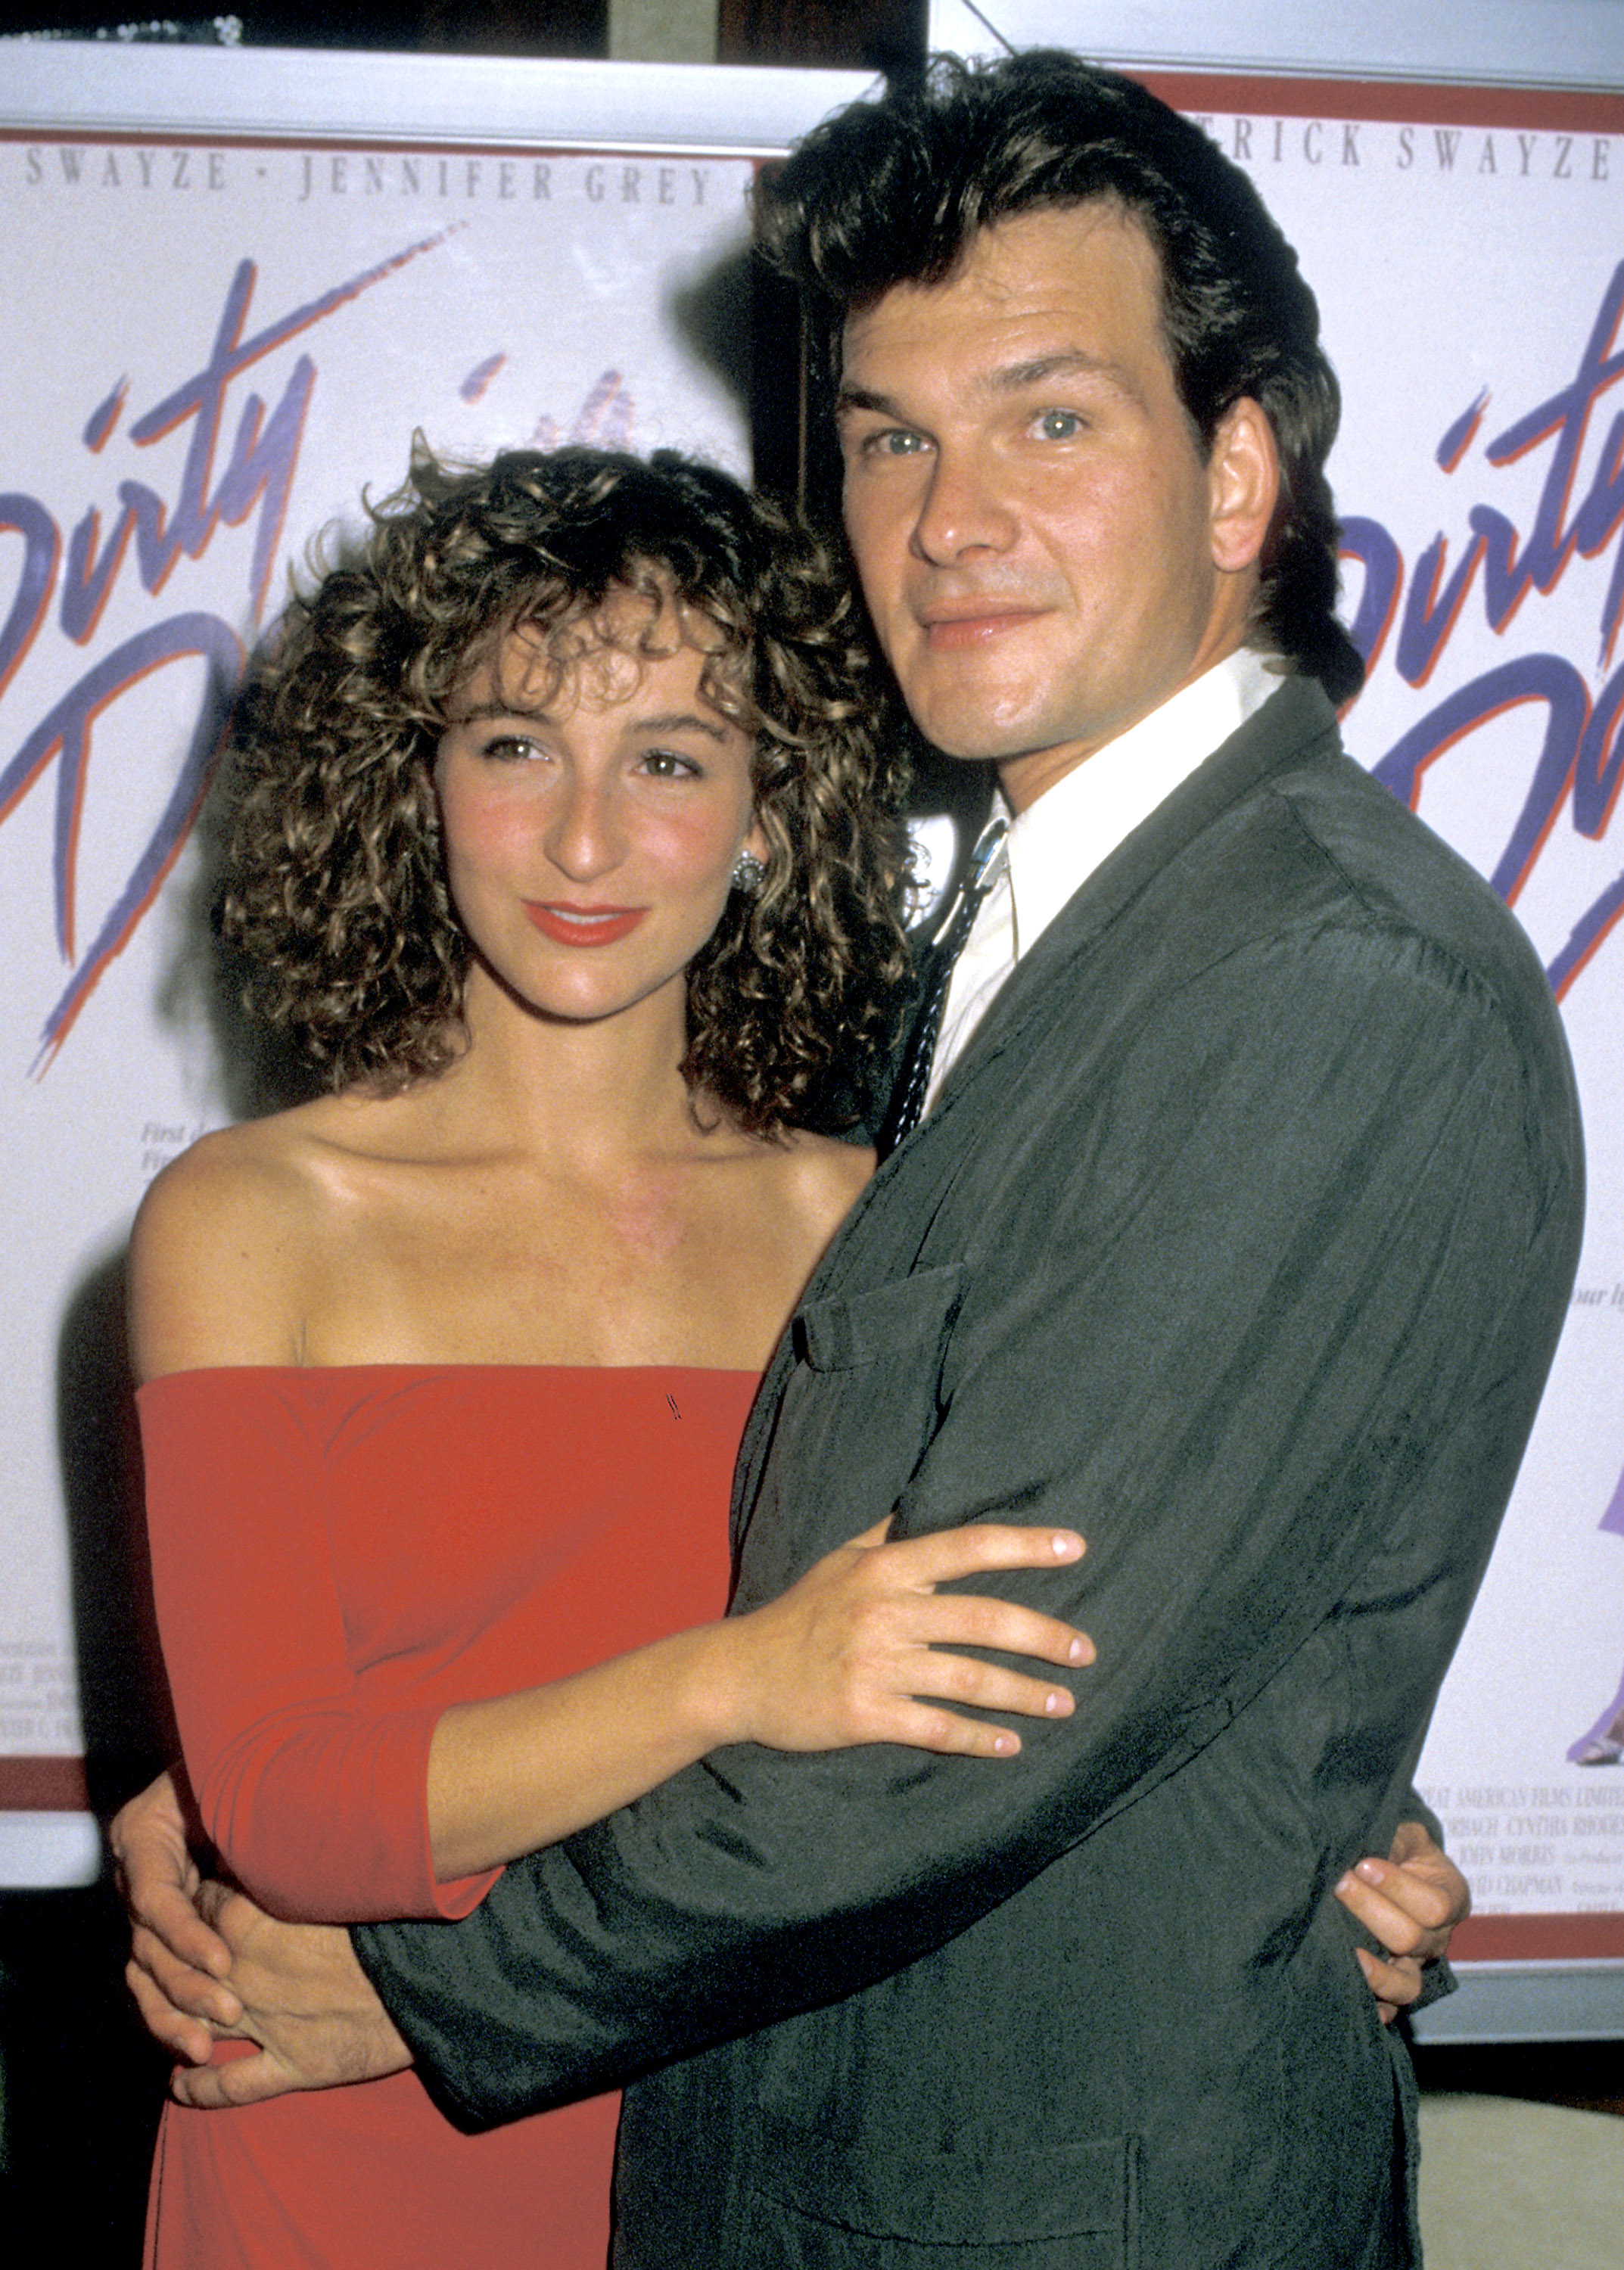 Jennifer Grey and Patrick Swayze attend the premiere of "Dirty Dancing" at Gemini Theater on August 17, 1987, in New York City, New York. | Source: Getty Images